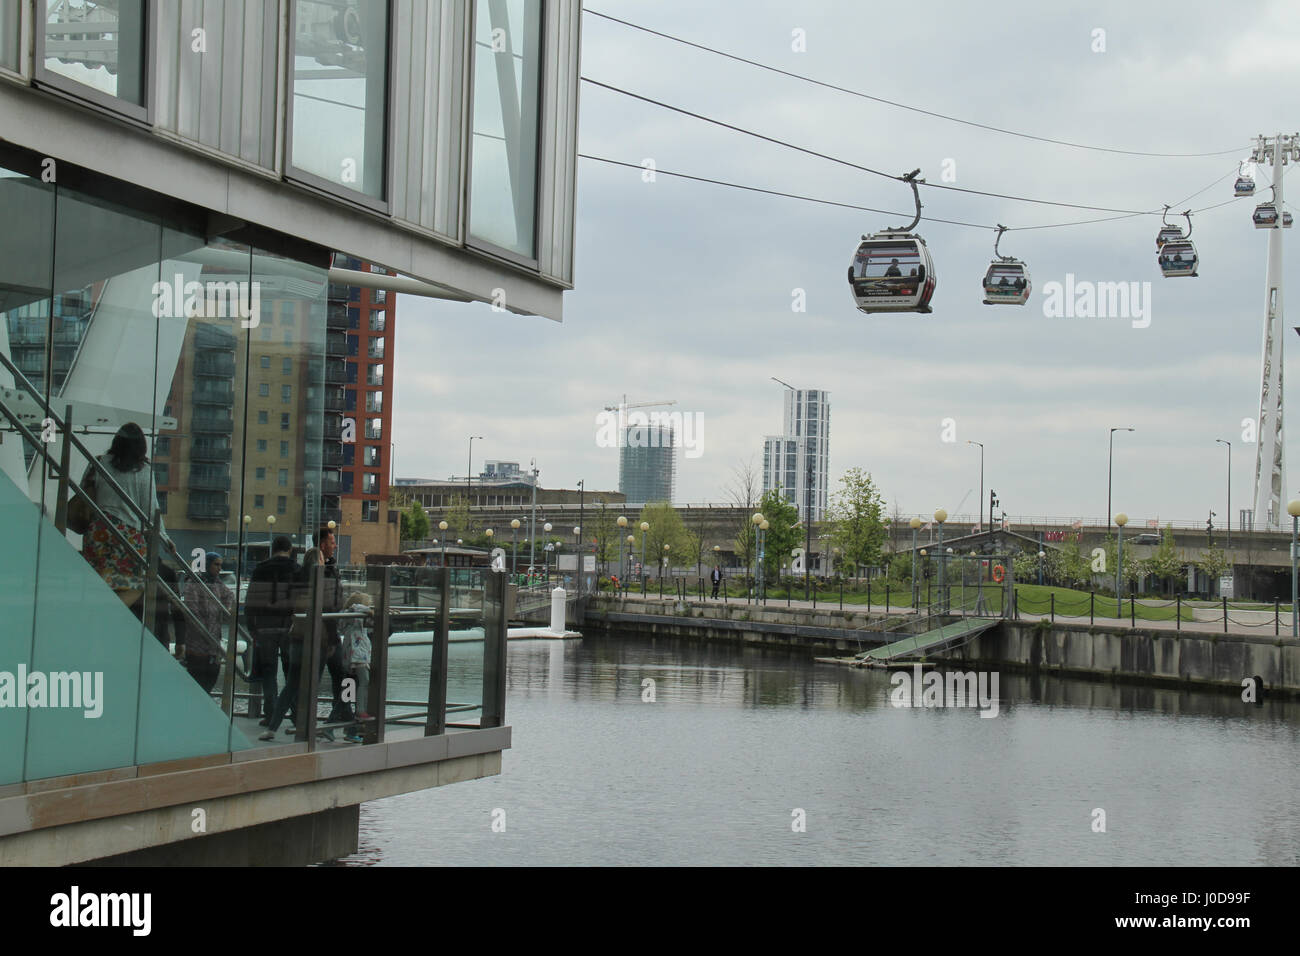 London, UK. 12th Apr, 2017. London, United Kingdom - April 12: People preppare to board the Emirates Air Line (Cable car) at the Royal Docks Terminal. The pods crosses the River Thames between Greenwich Peninsula and the Royal Docks in approximately 10 minutes each way. Credit: David Mbiyu/Alamy Live News Stock Photo